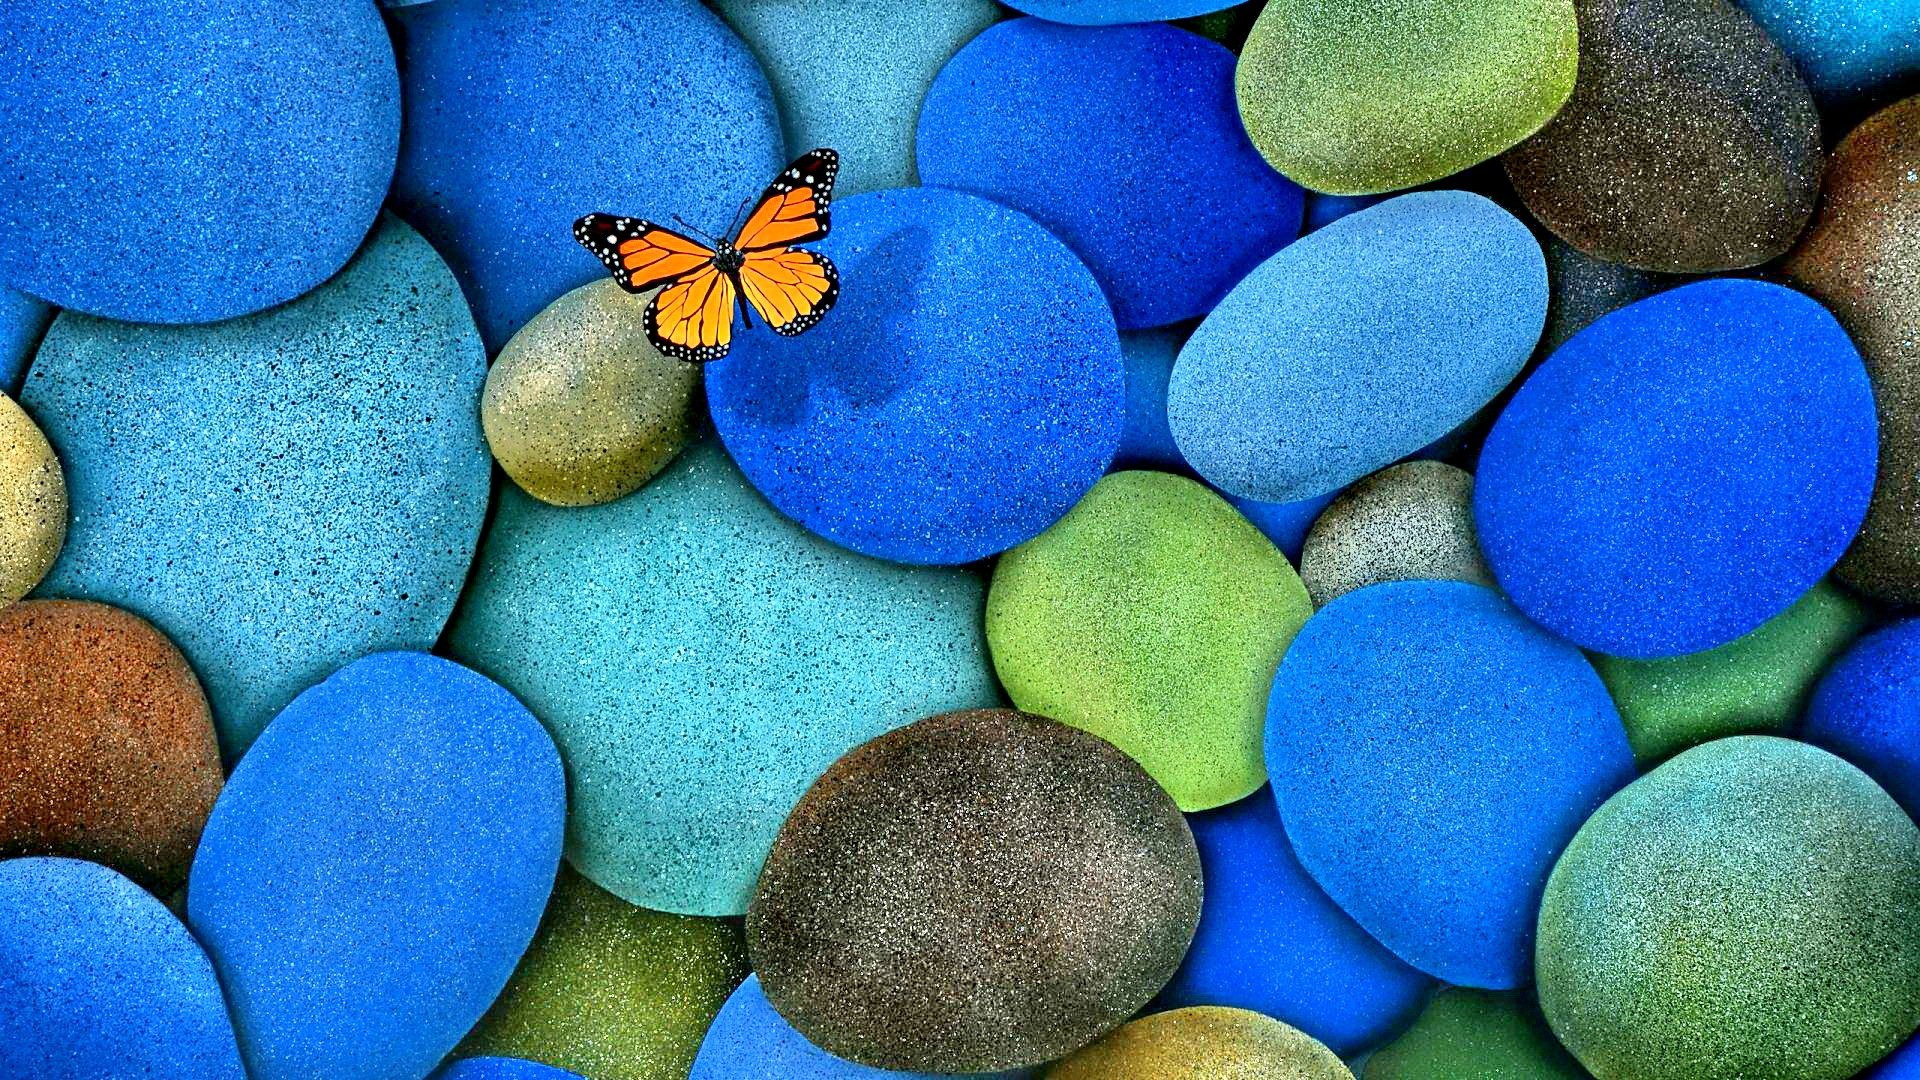 1920x1080 Butterfly Blue Beautiful Pretty Nature Splendo Things Colorful Rocks  Photography 3d Desktop Wallpapers - 